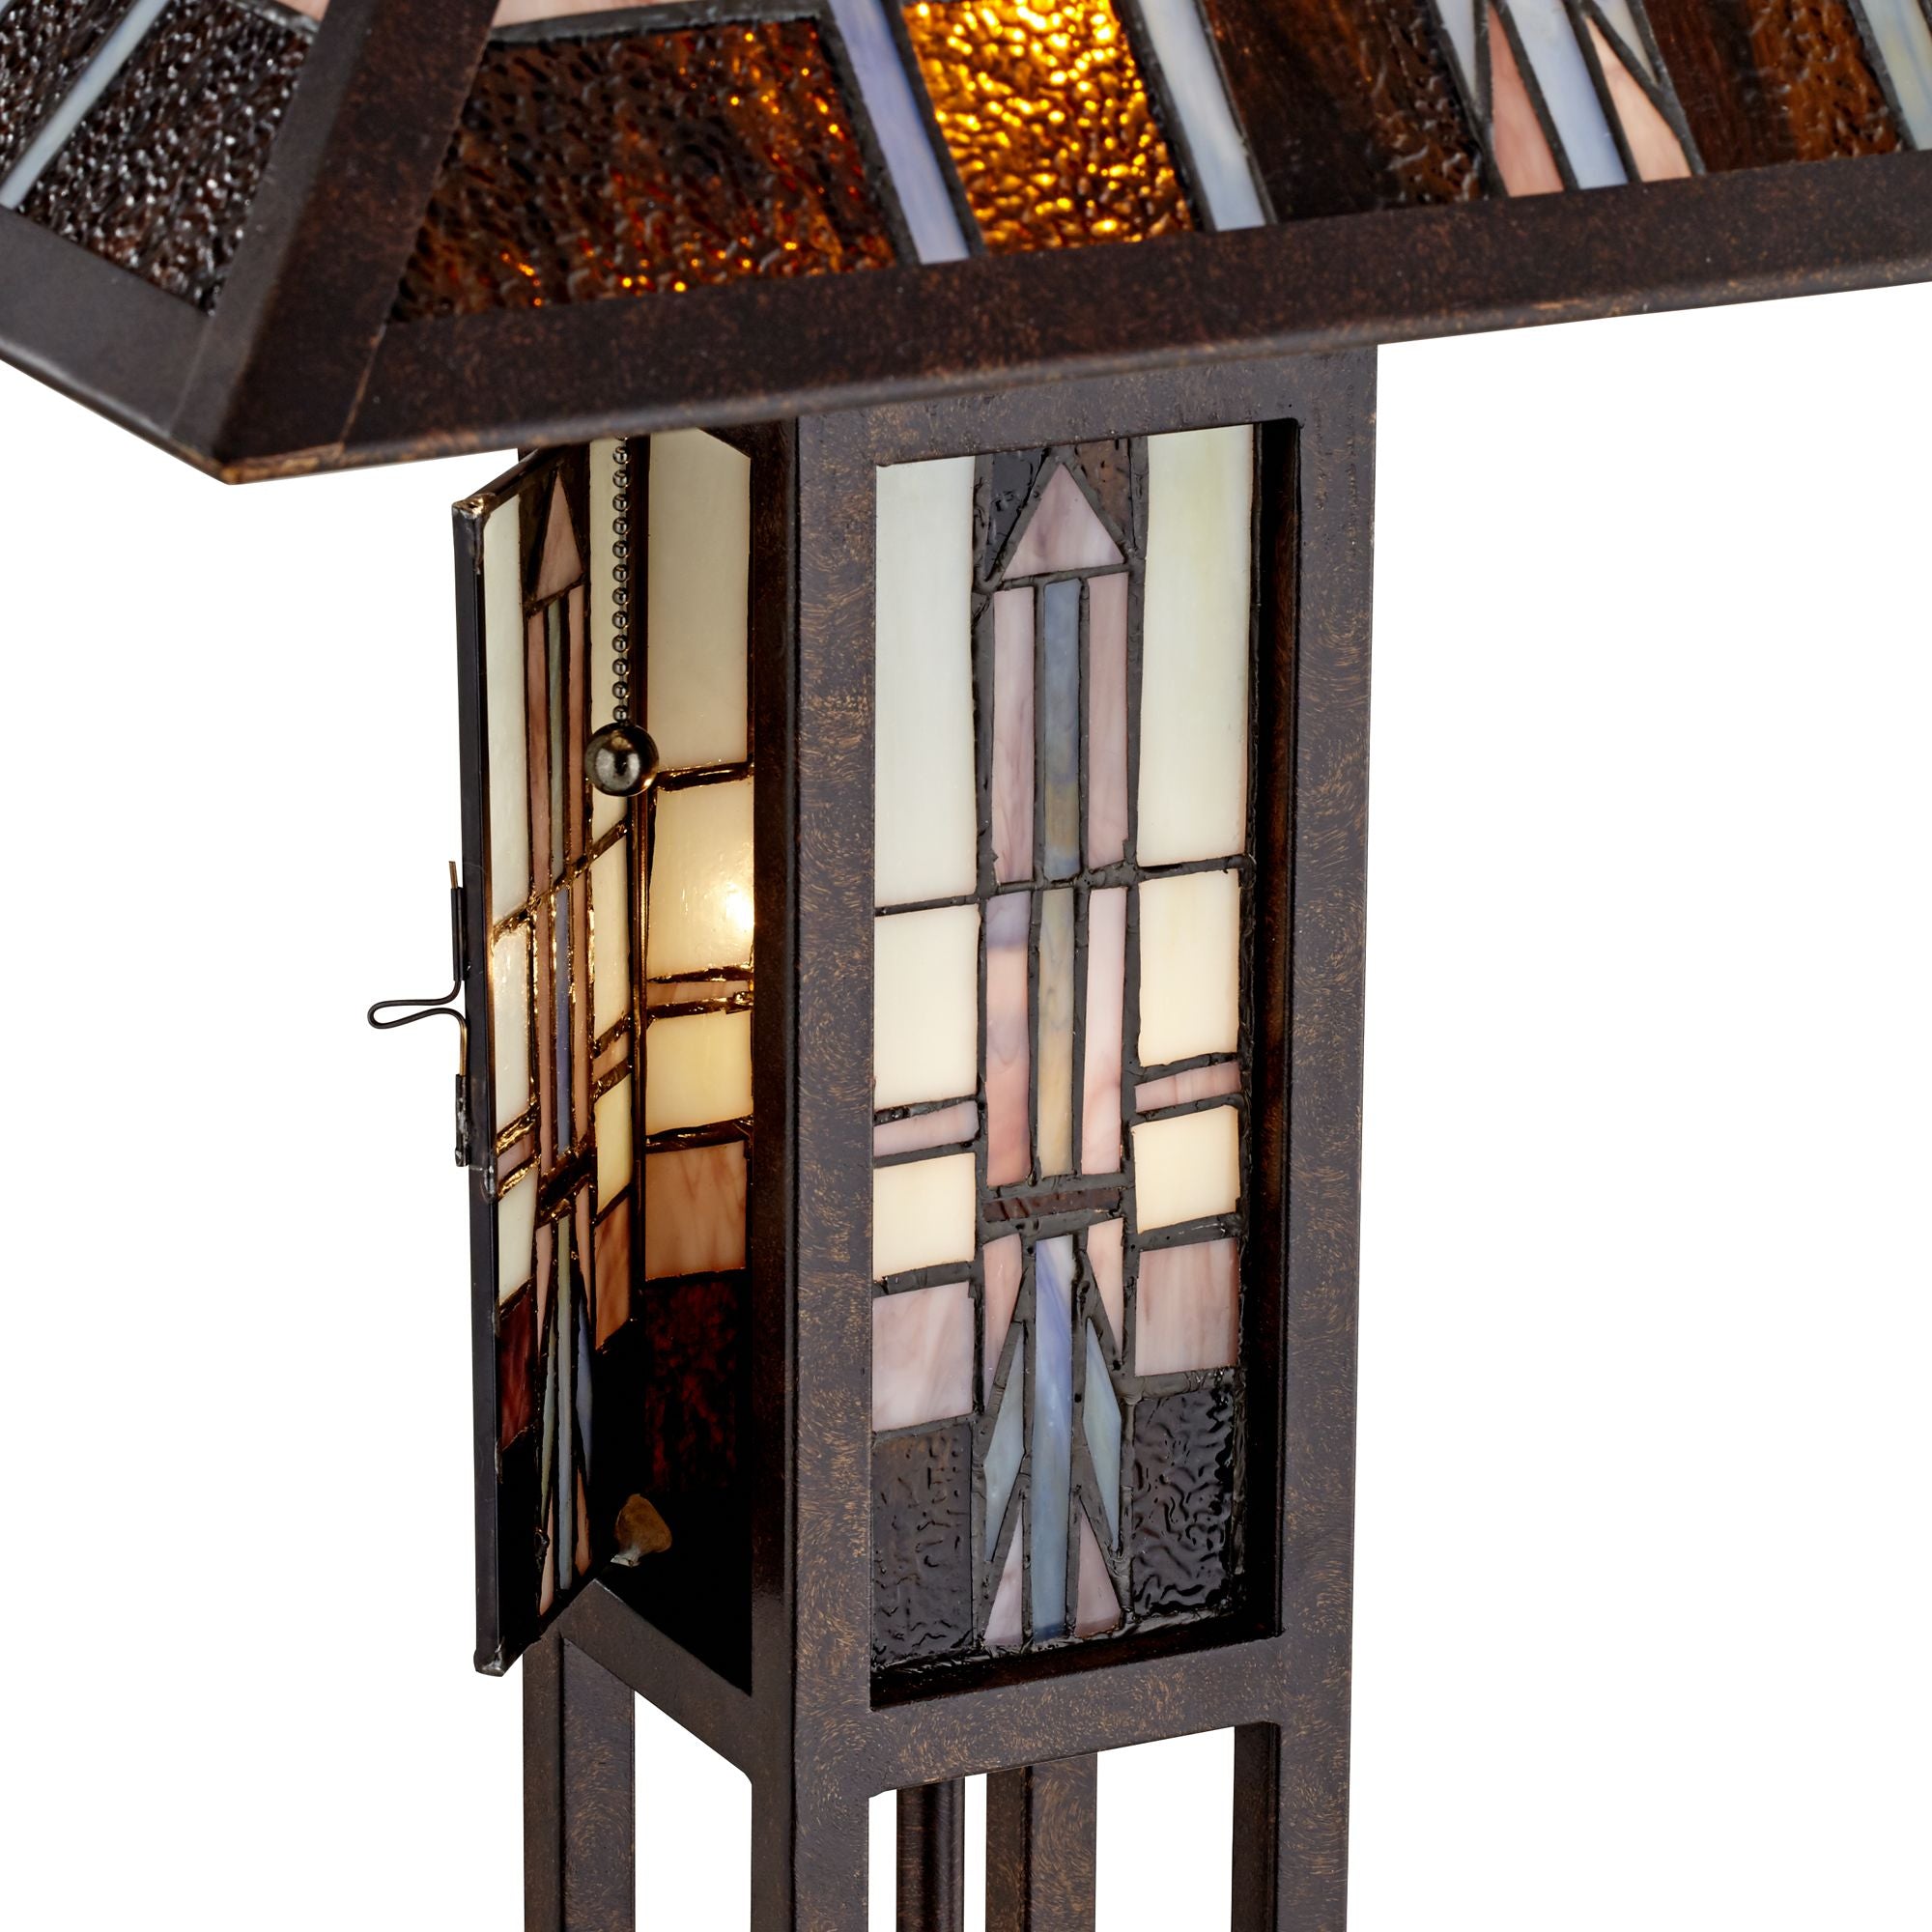 Robert Louis  Mission Floor Lamp Art Deco with Nightlight 60.5" Tall Oiled Bronze Stained Glass Shade for Living Room Reading Bedroom